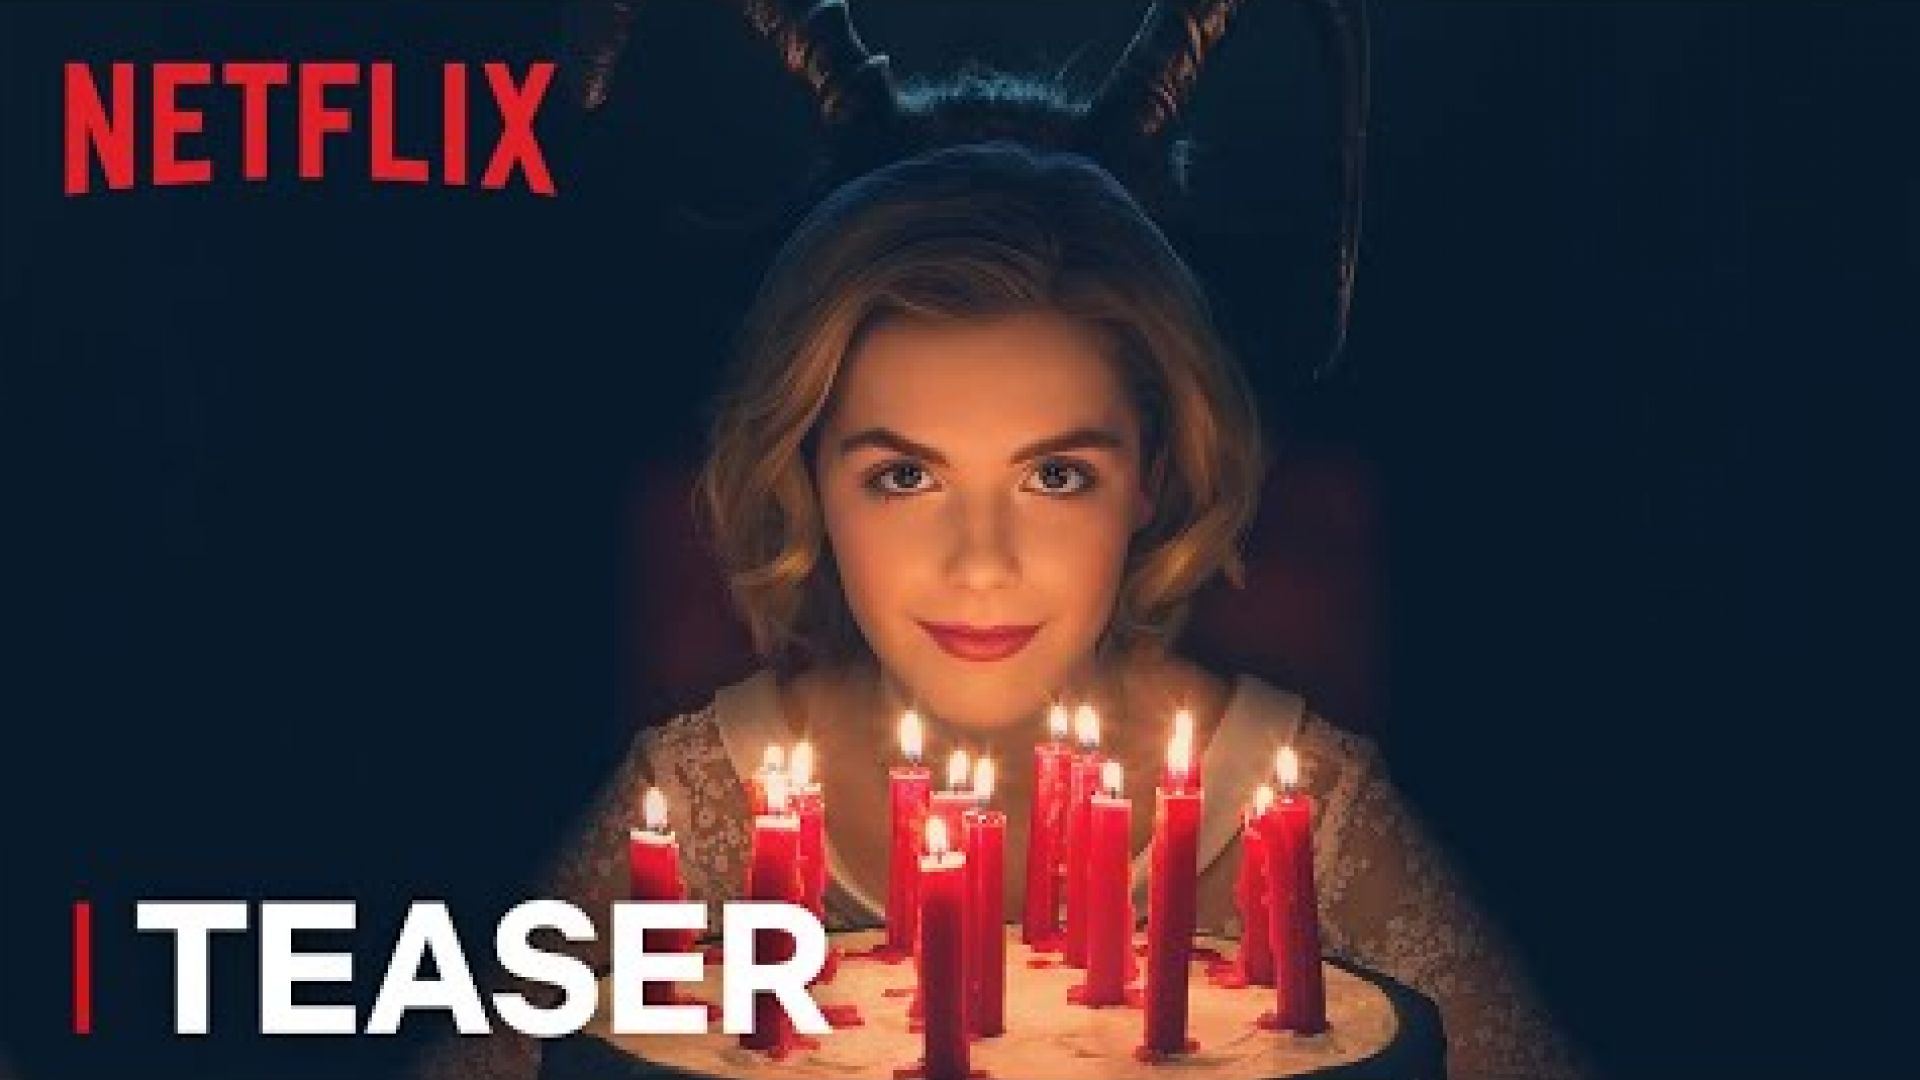 'The Chilling Adventures of Sabrina' Teaser